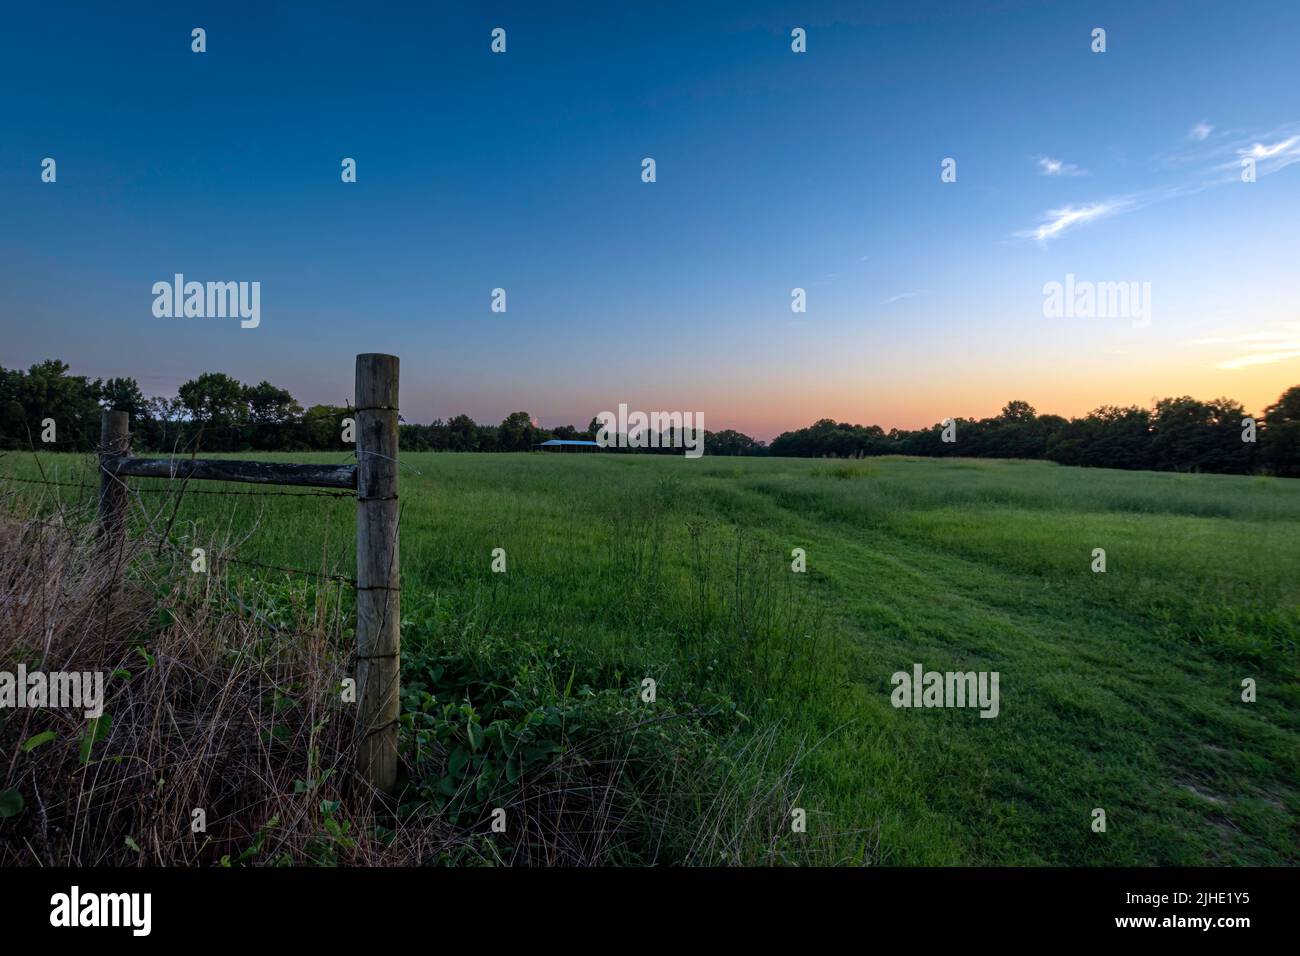 Countryside landscape of wheel tracks through a green hay field leading to a pole barn in the distance at sunset. Stock Photo